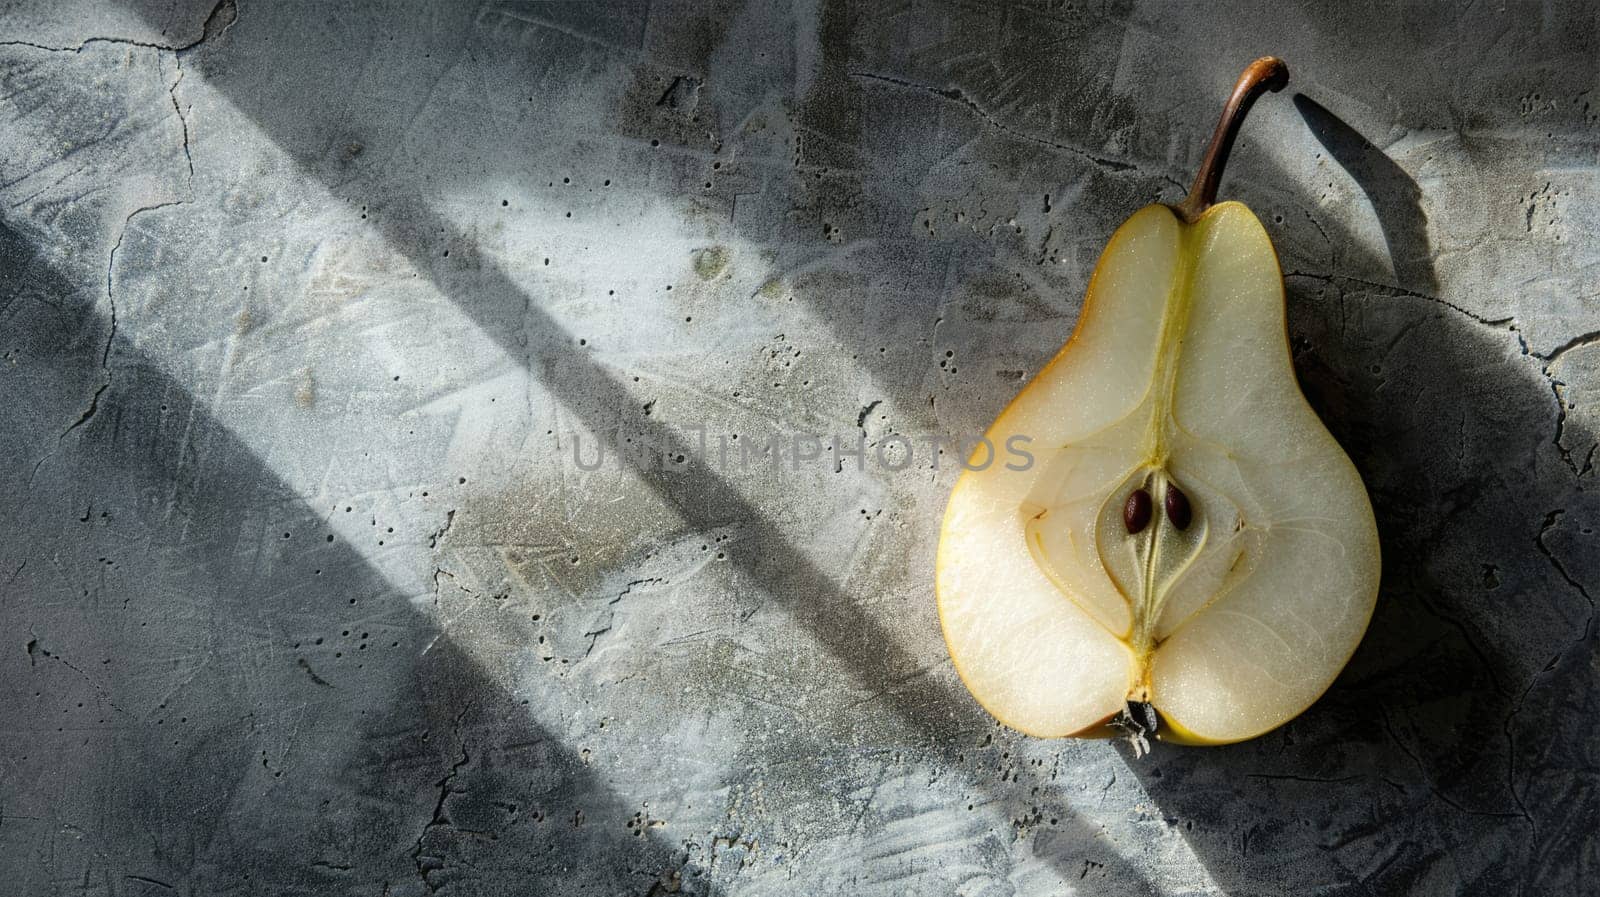 Sliced pear on a textured gray background by natali_brill